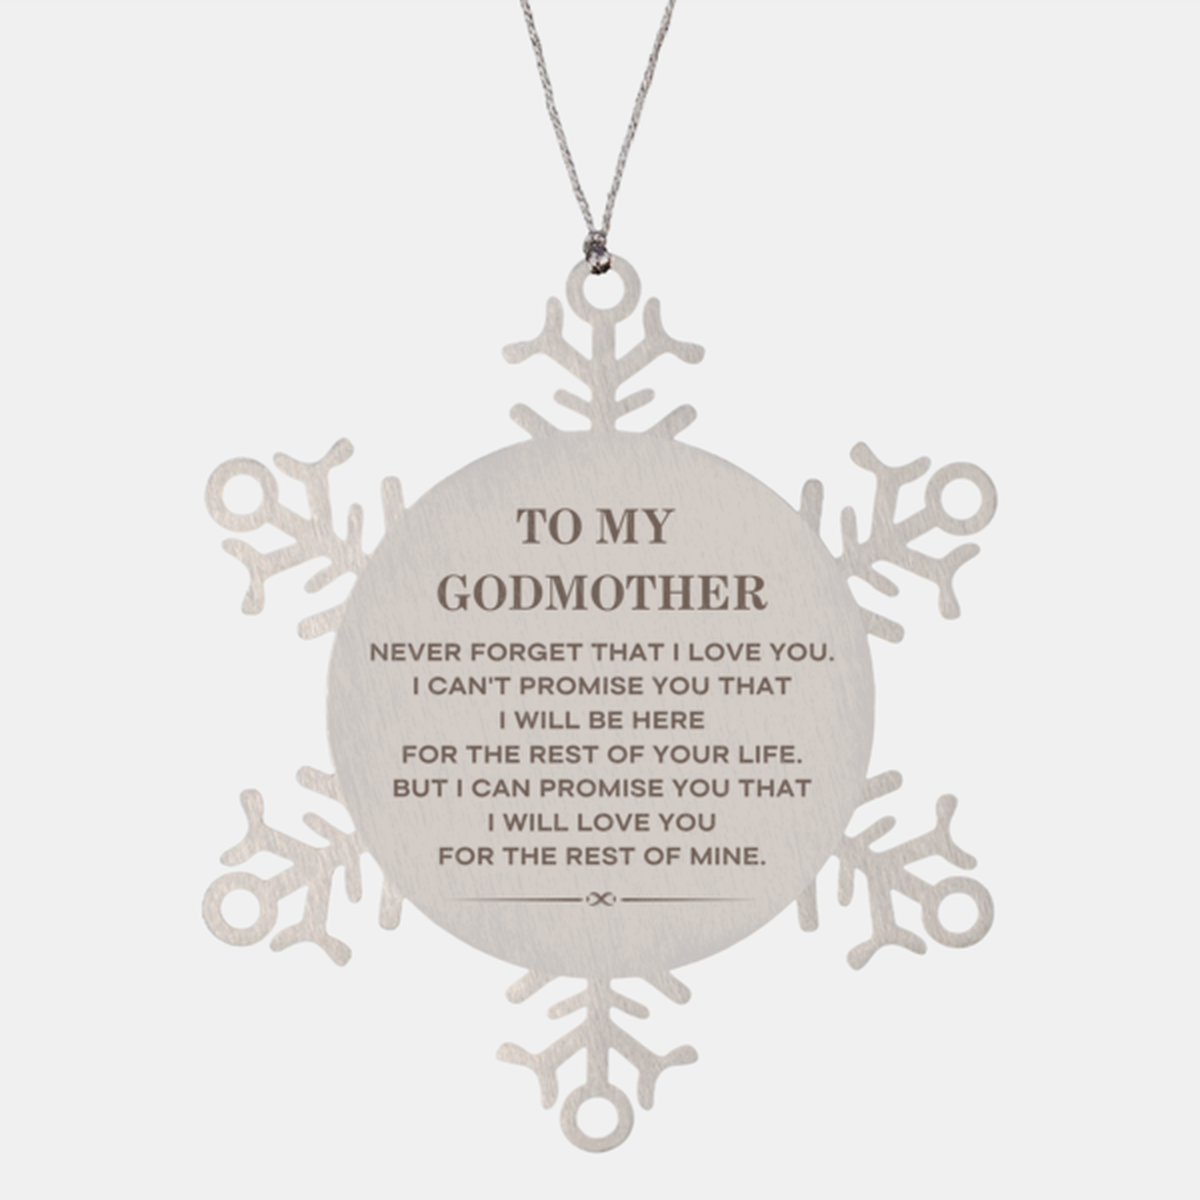 To My Godmother Gifts, I will love you for the rest of mine, Love Godmother Ornament, Birthday Christmas Unique Snowflake Ornament For Godmother